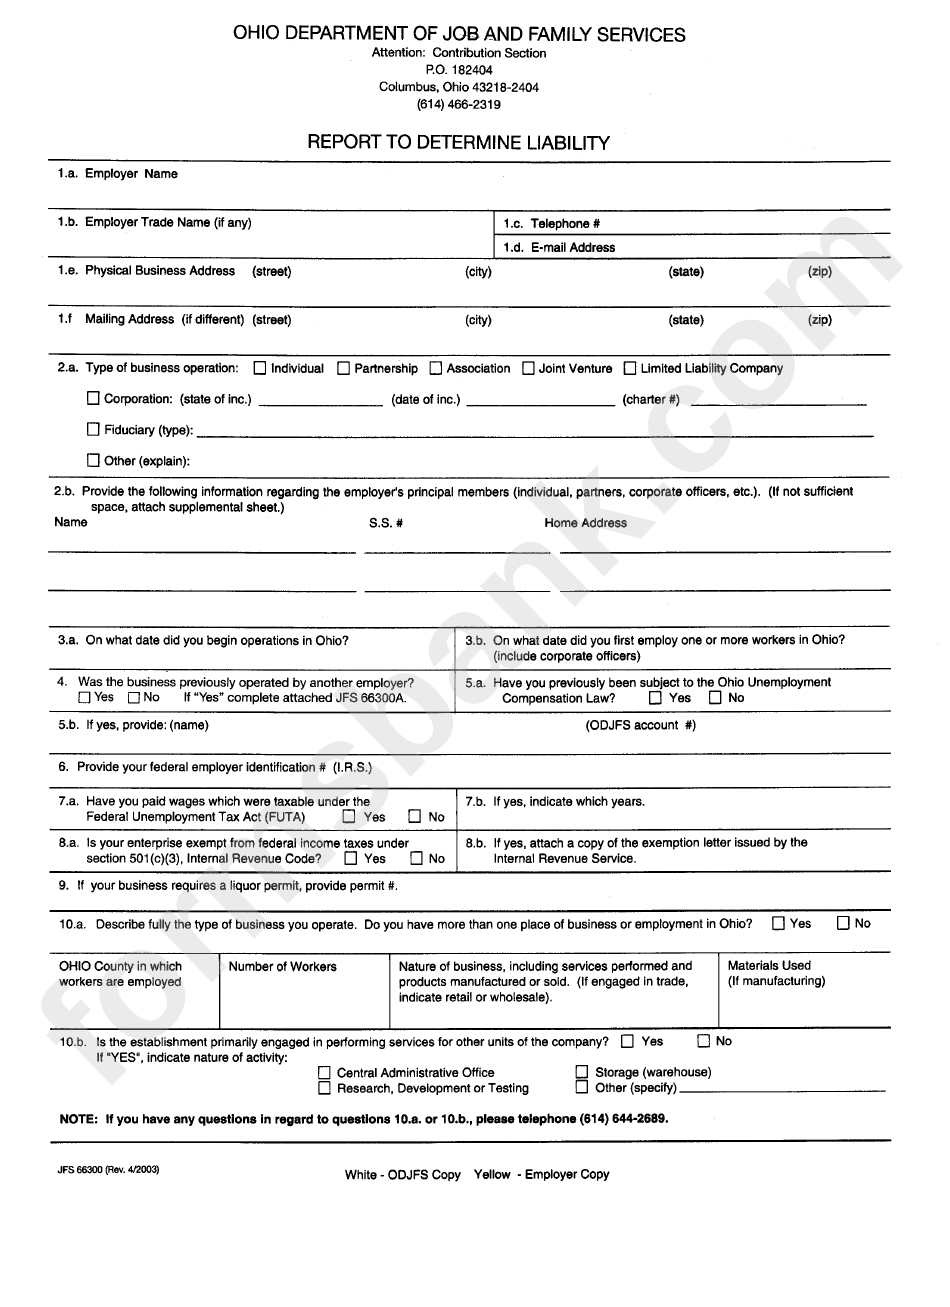 Form Jfs 66300 - Report To Determine Liability - Ohio Department Of Job And Family Services